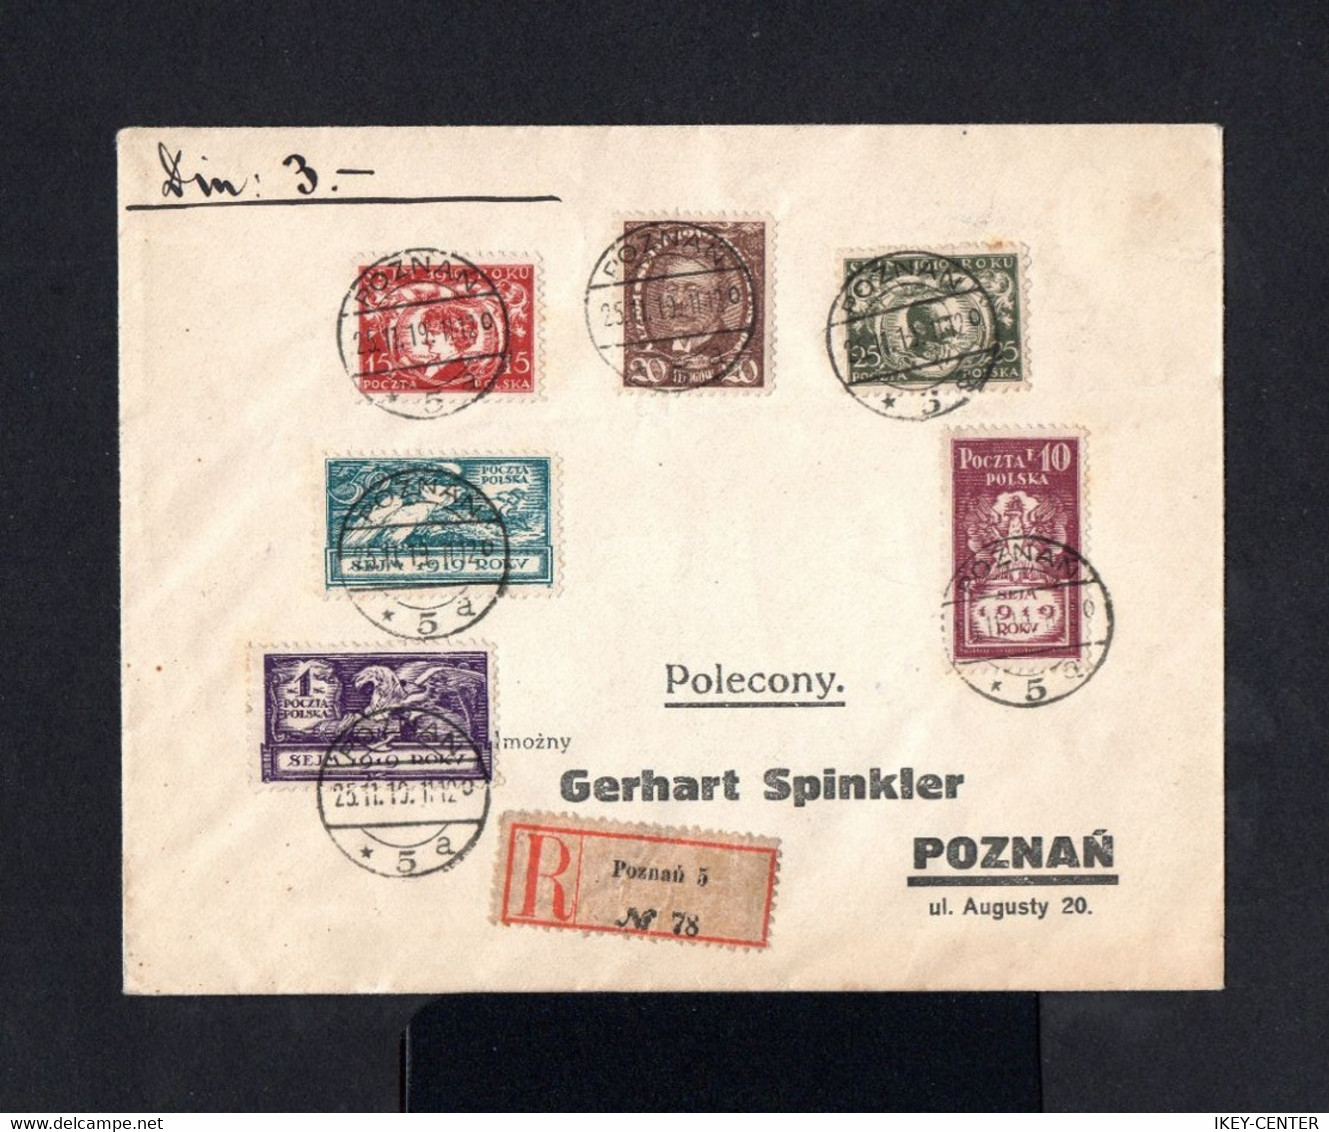 S2989-POLAND-.REGISTERED COVER POZNAN. 1919.Enveloppe RECOMMANDE Pologne. - Covers & Documents